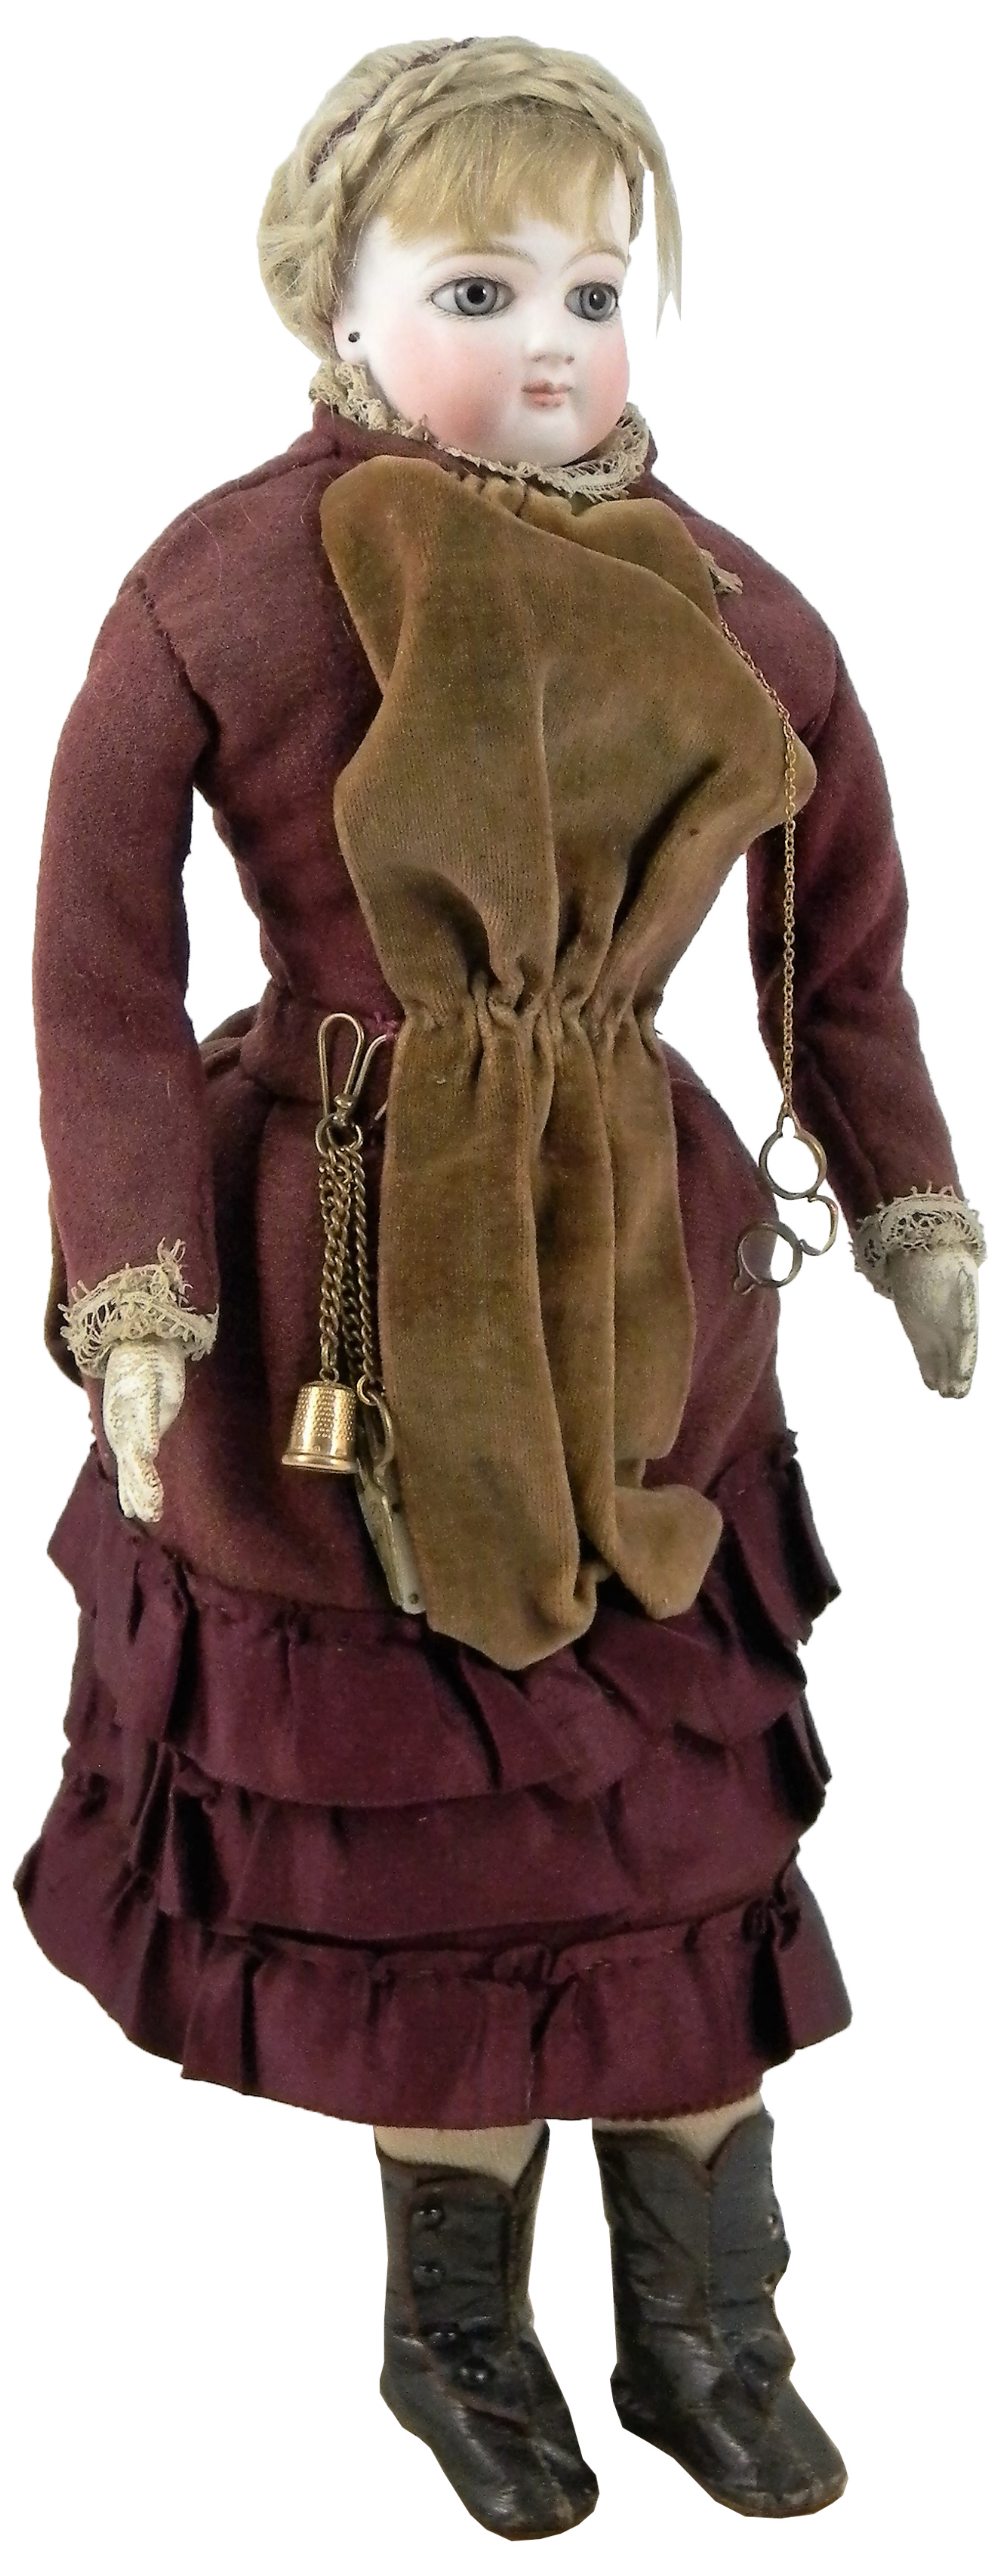 Early bisque shoulder head fashion doll in original clothes, circa 1870, beautiful pale bisque